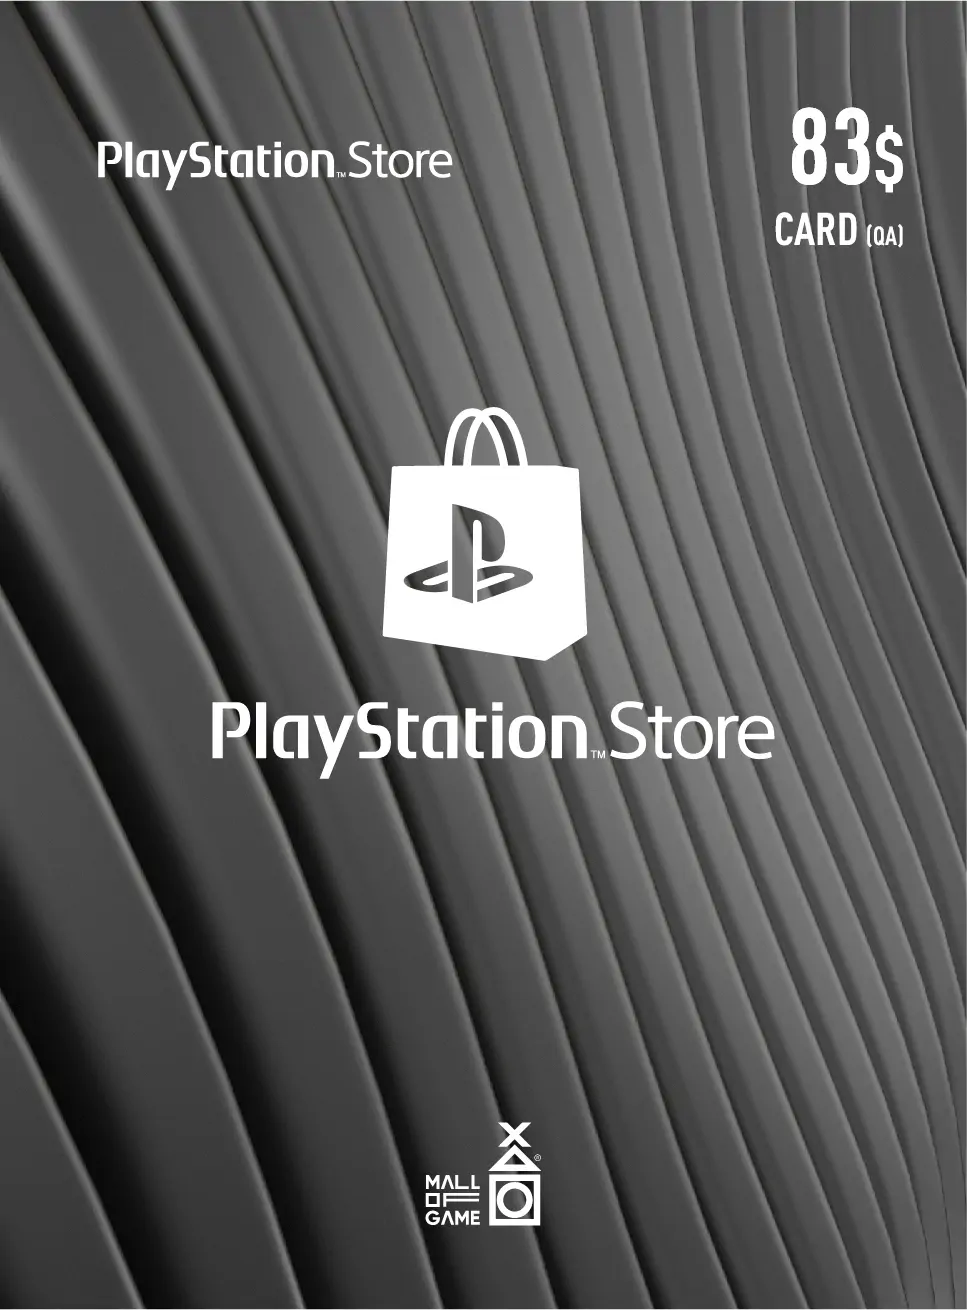 PlayStation™Store USD83 Gift Cards (QA)